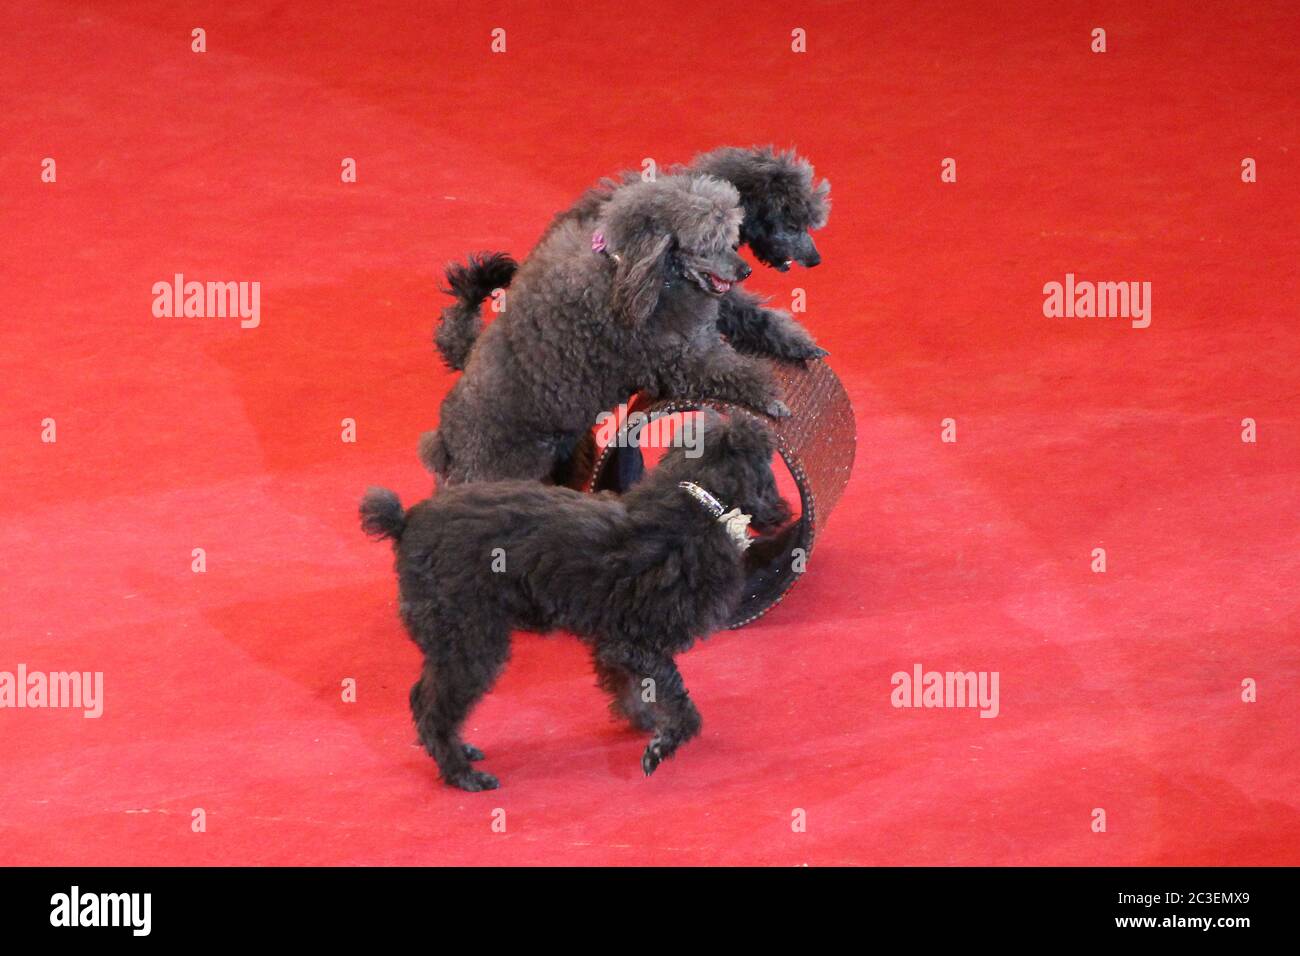 Trained poodles performing in circus arena. Trained dogs in circus. Amusing dogs. Three poodles Stock Photo